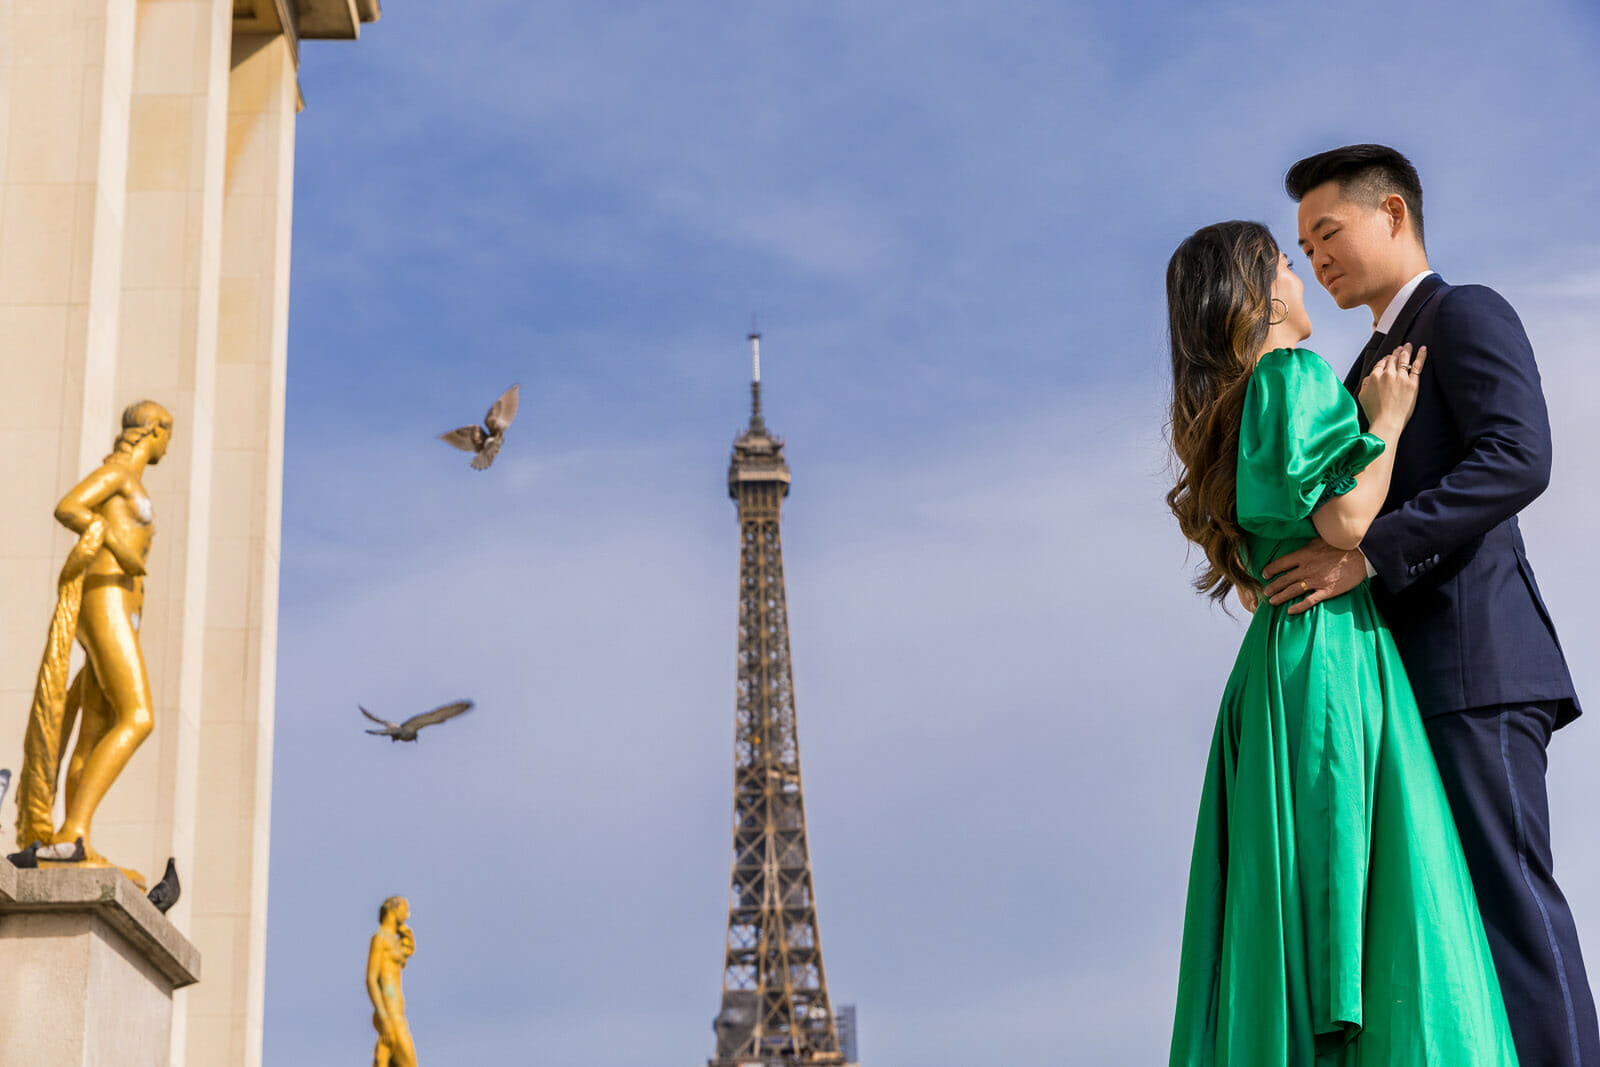 Stunning Eiffel Tower photoshoot at the fountains of Trocadero.